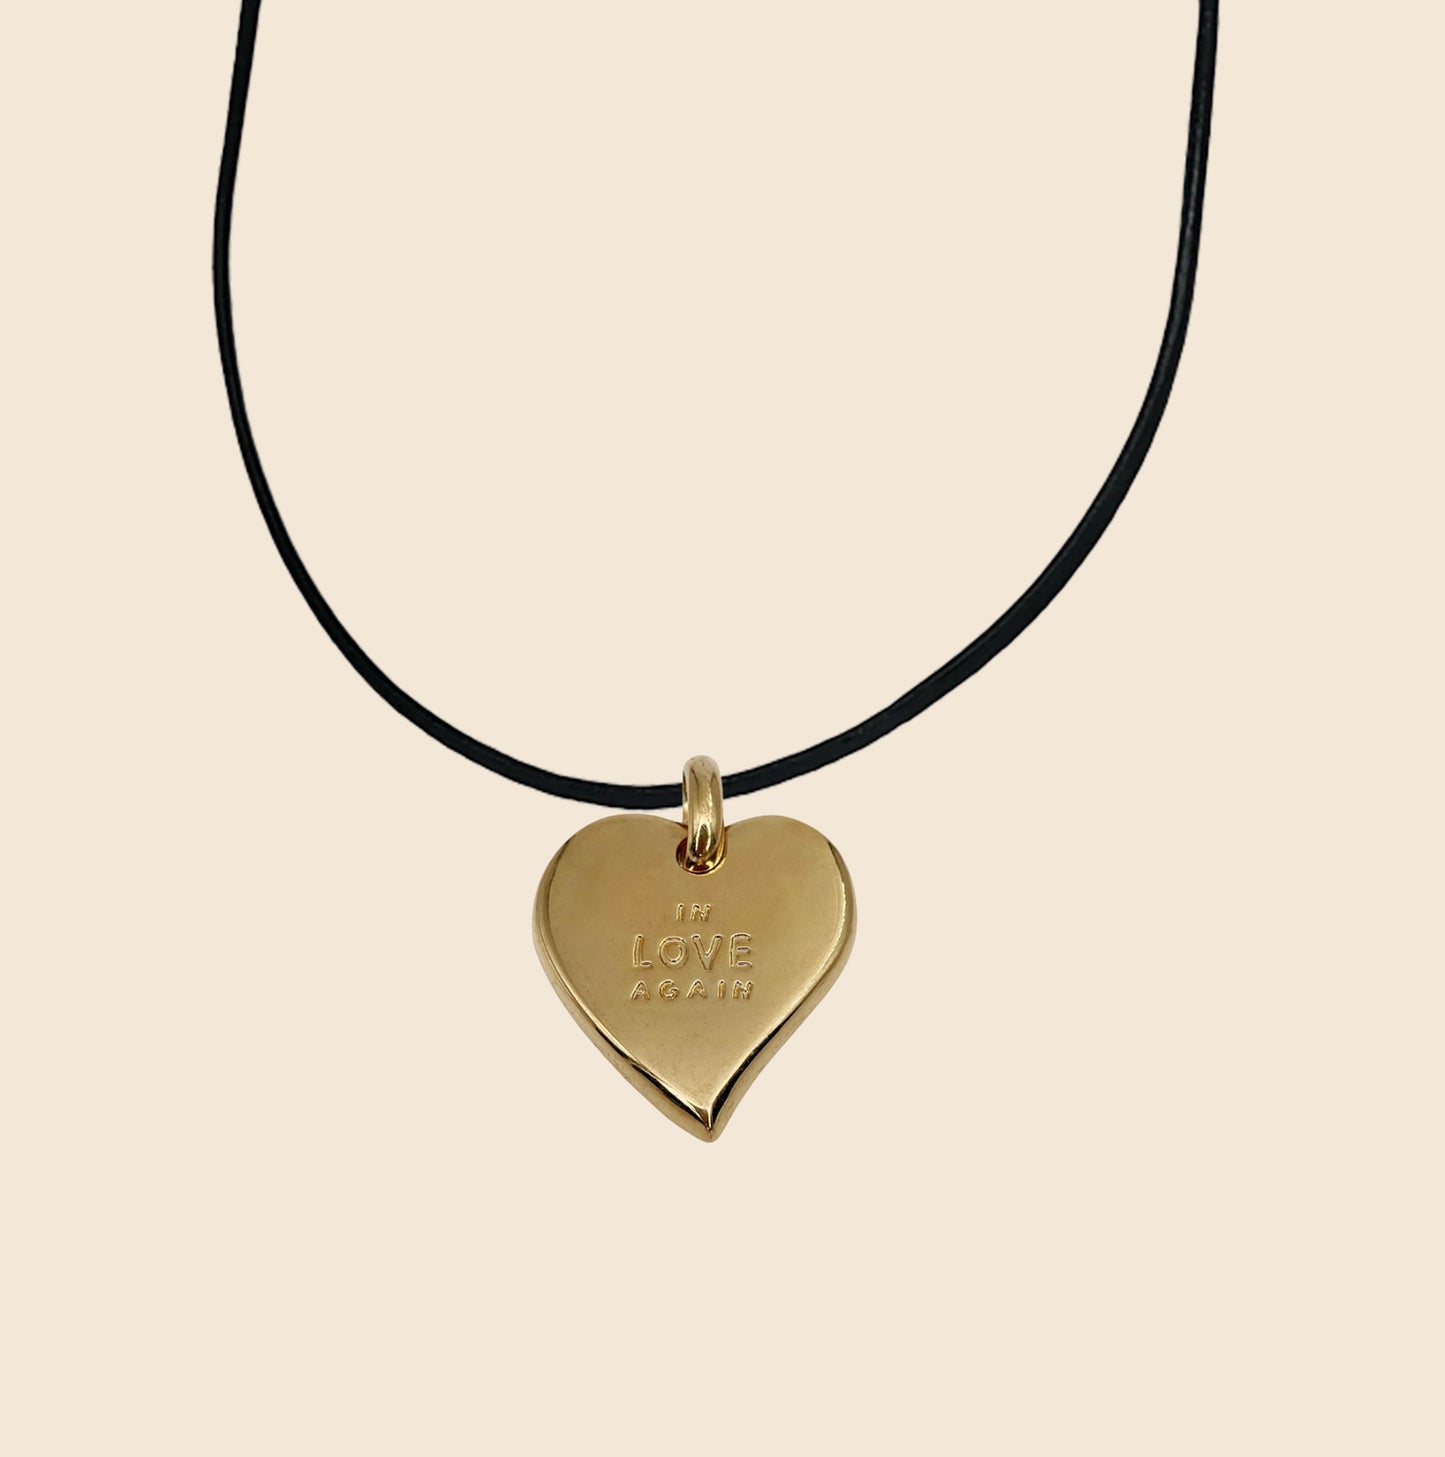 YVES SAINT LAURENT GOLD HEART "IN LOVE AGAIN" CORD CHOKER NECKLACE